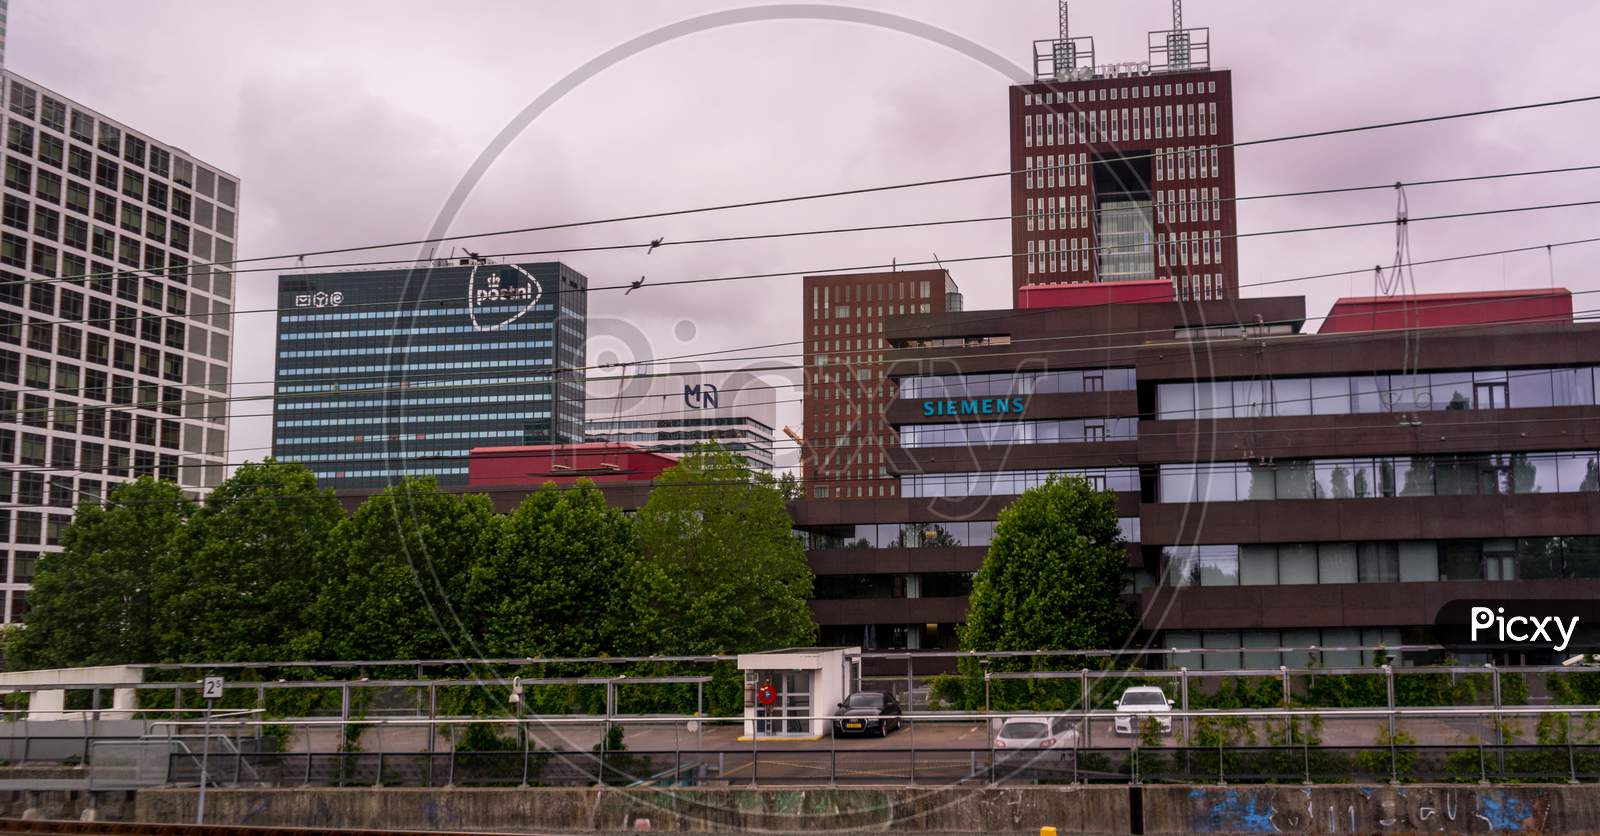 Den Haag, 22 June 2018: The Post Nl And Siemens Building Viewed From Den Haag Central Railway Station